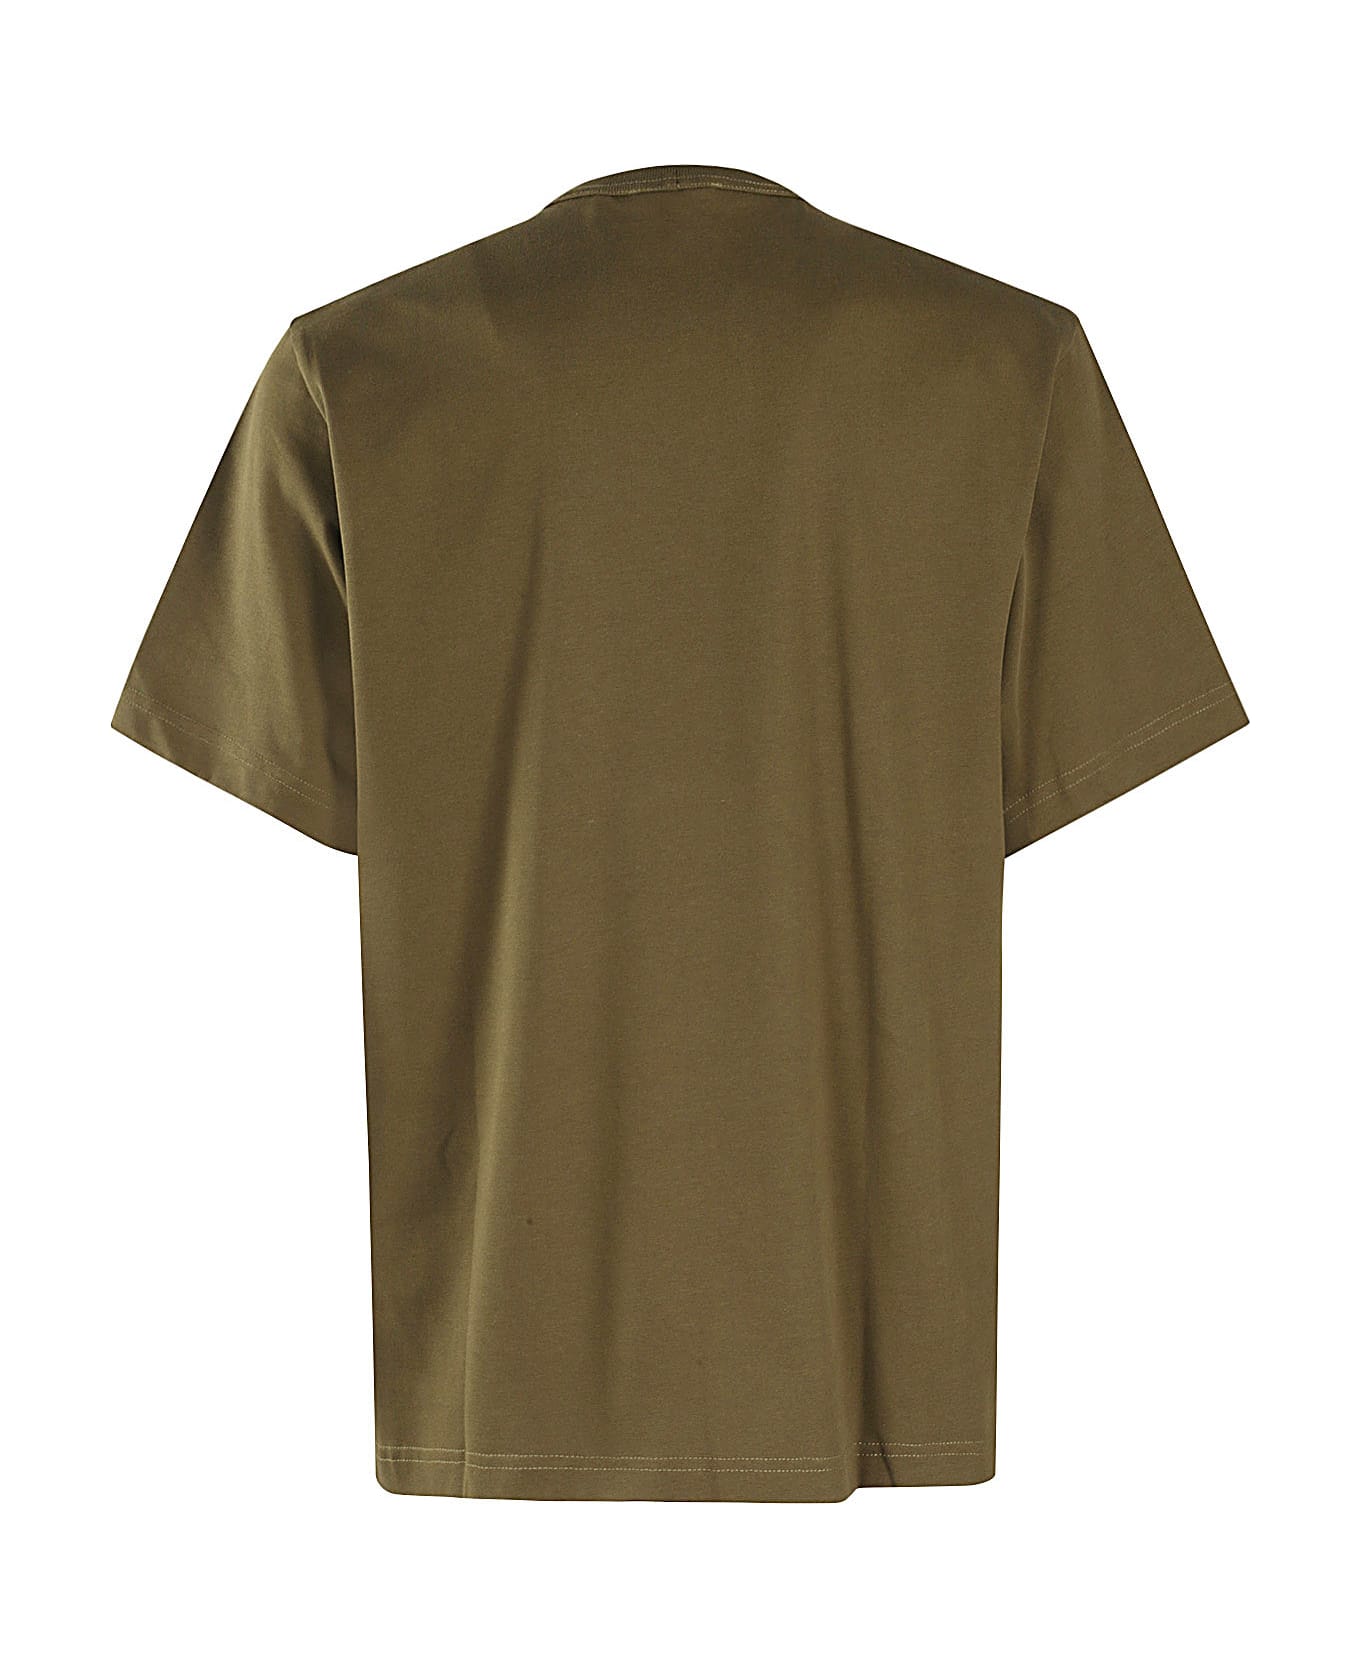 Helmut Lang Outer Tee - X Olive シャツ